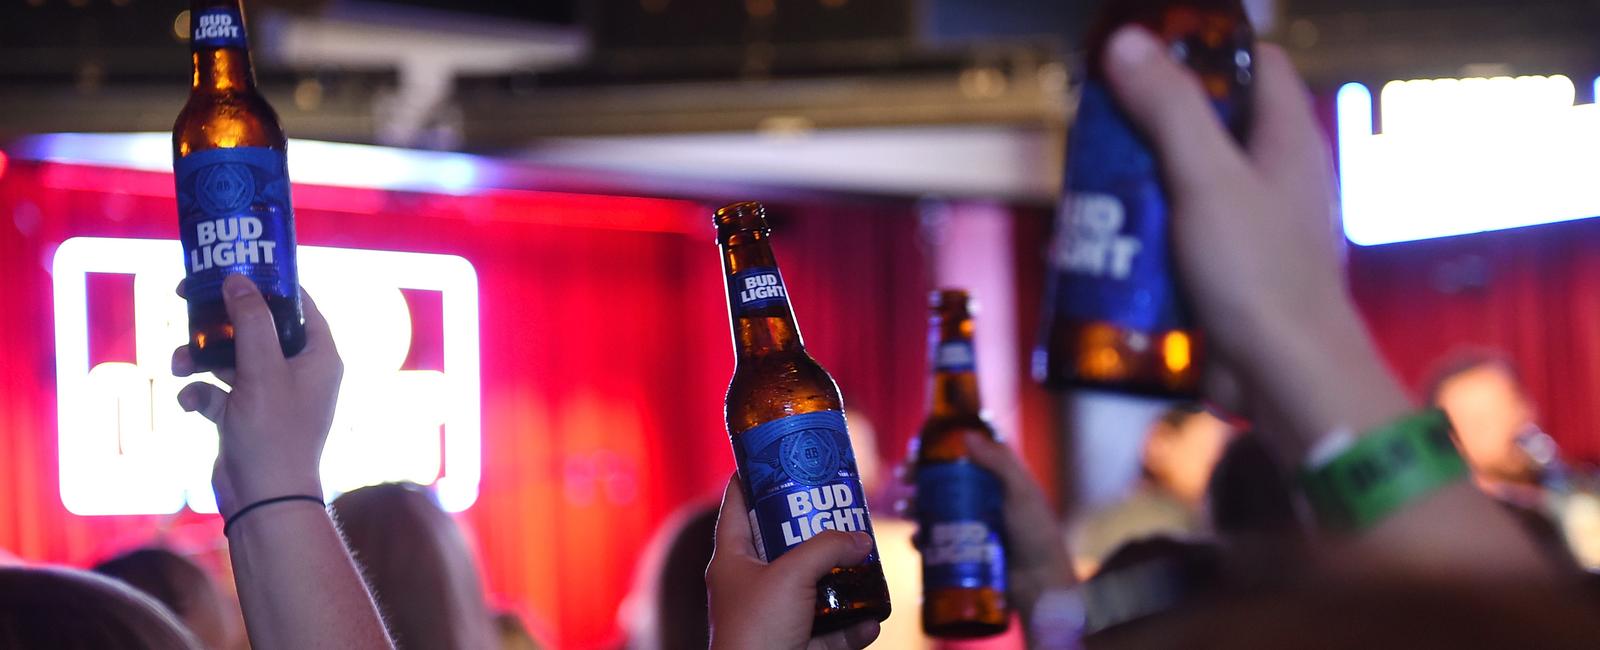 A wisconsin forklift operator for a miller beer distributor was fired when a picture was published in a newspaper showing him drinking a bud light